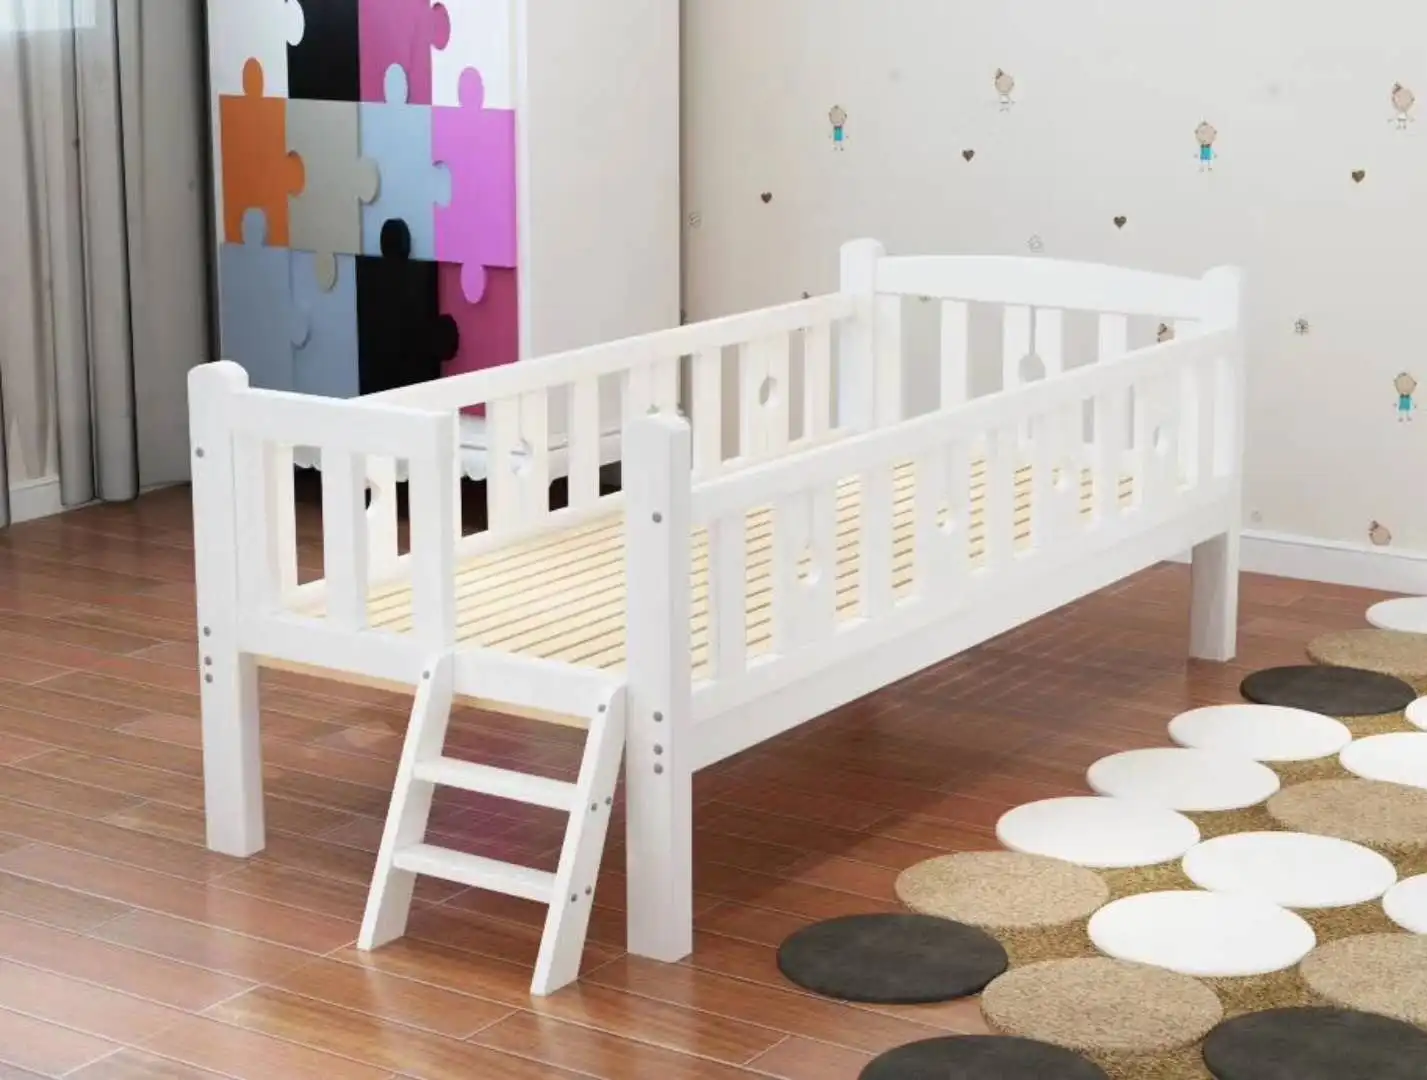 Children high quality wooden home bedroom furniture safely get in and out stair case rail solid wood kids bed TYKB001